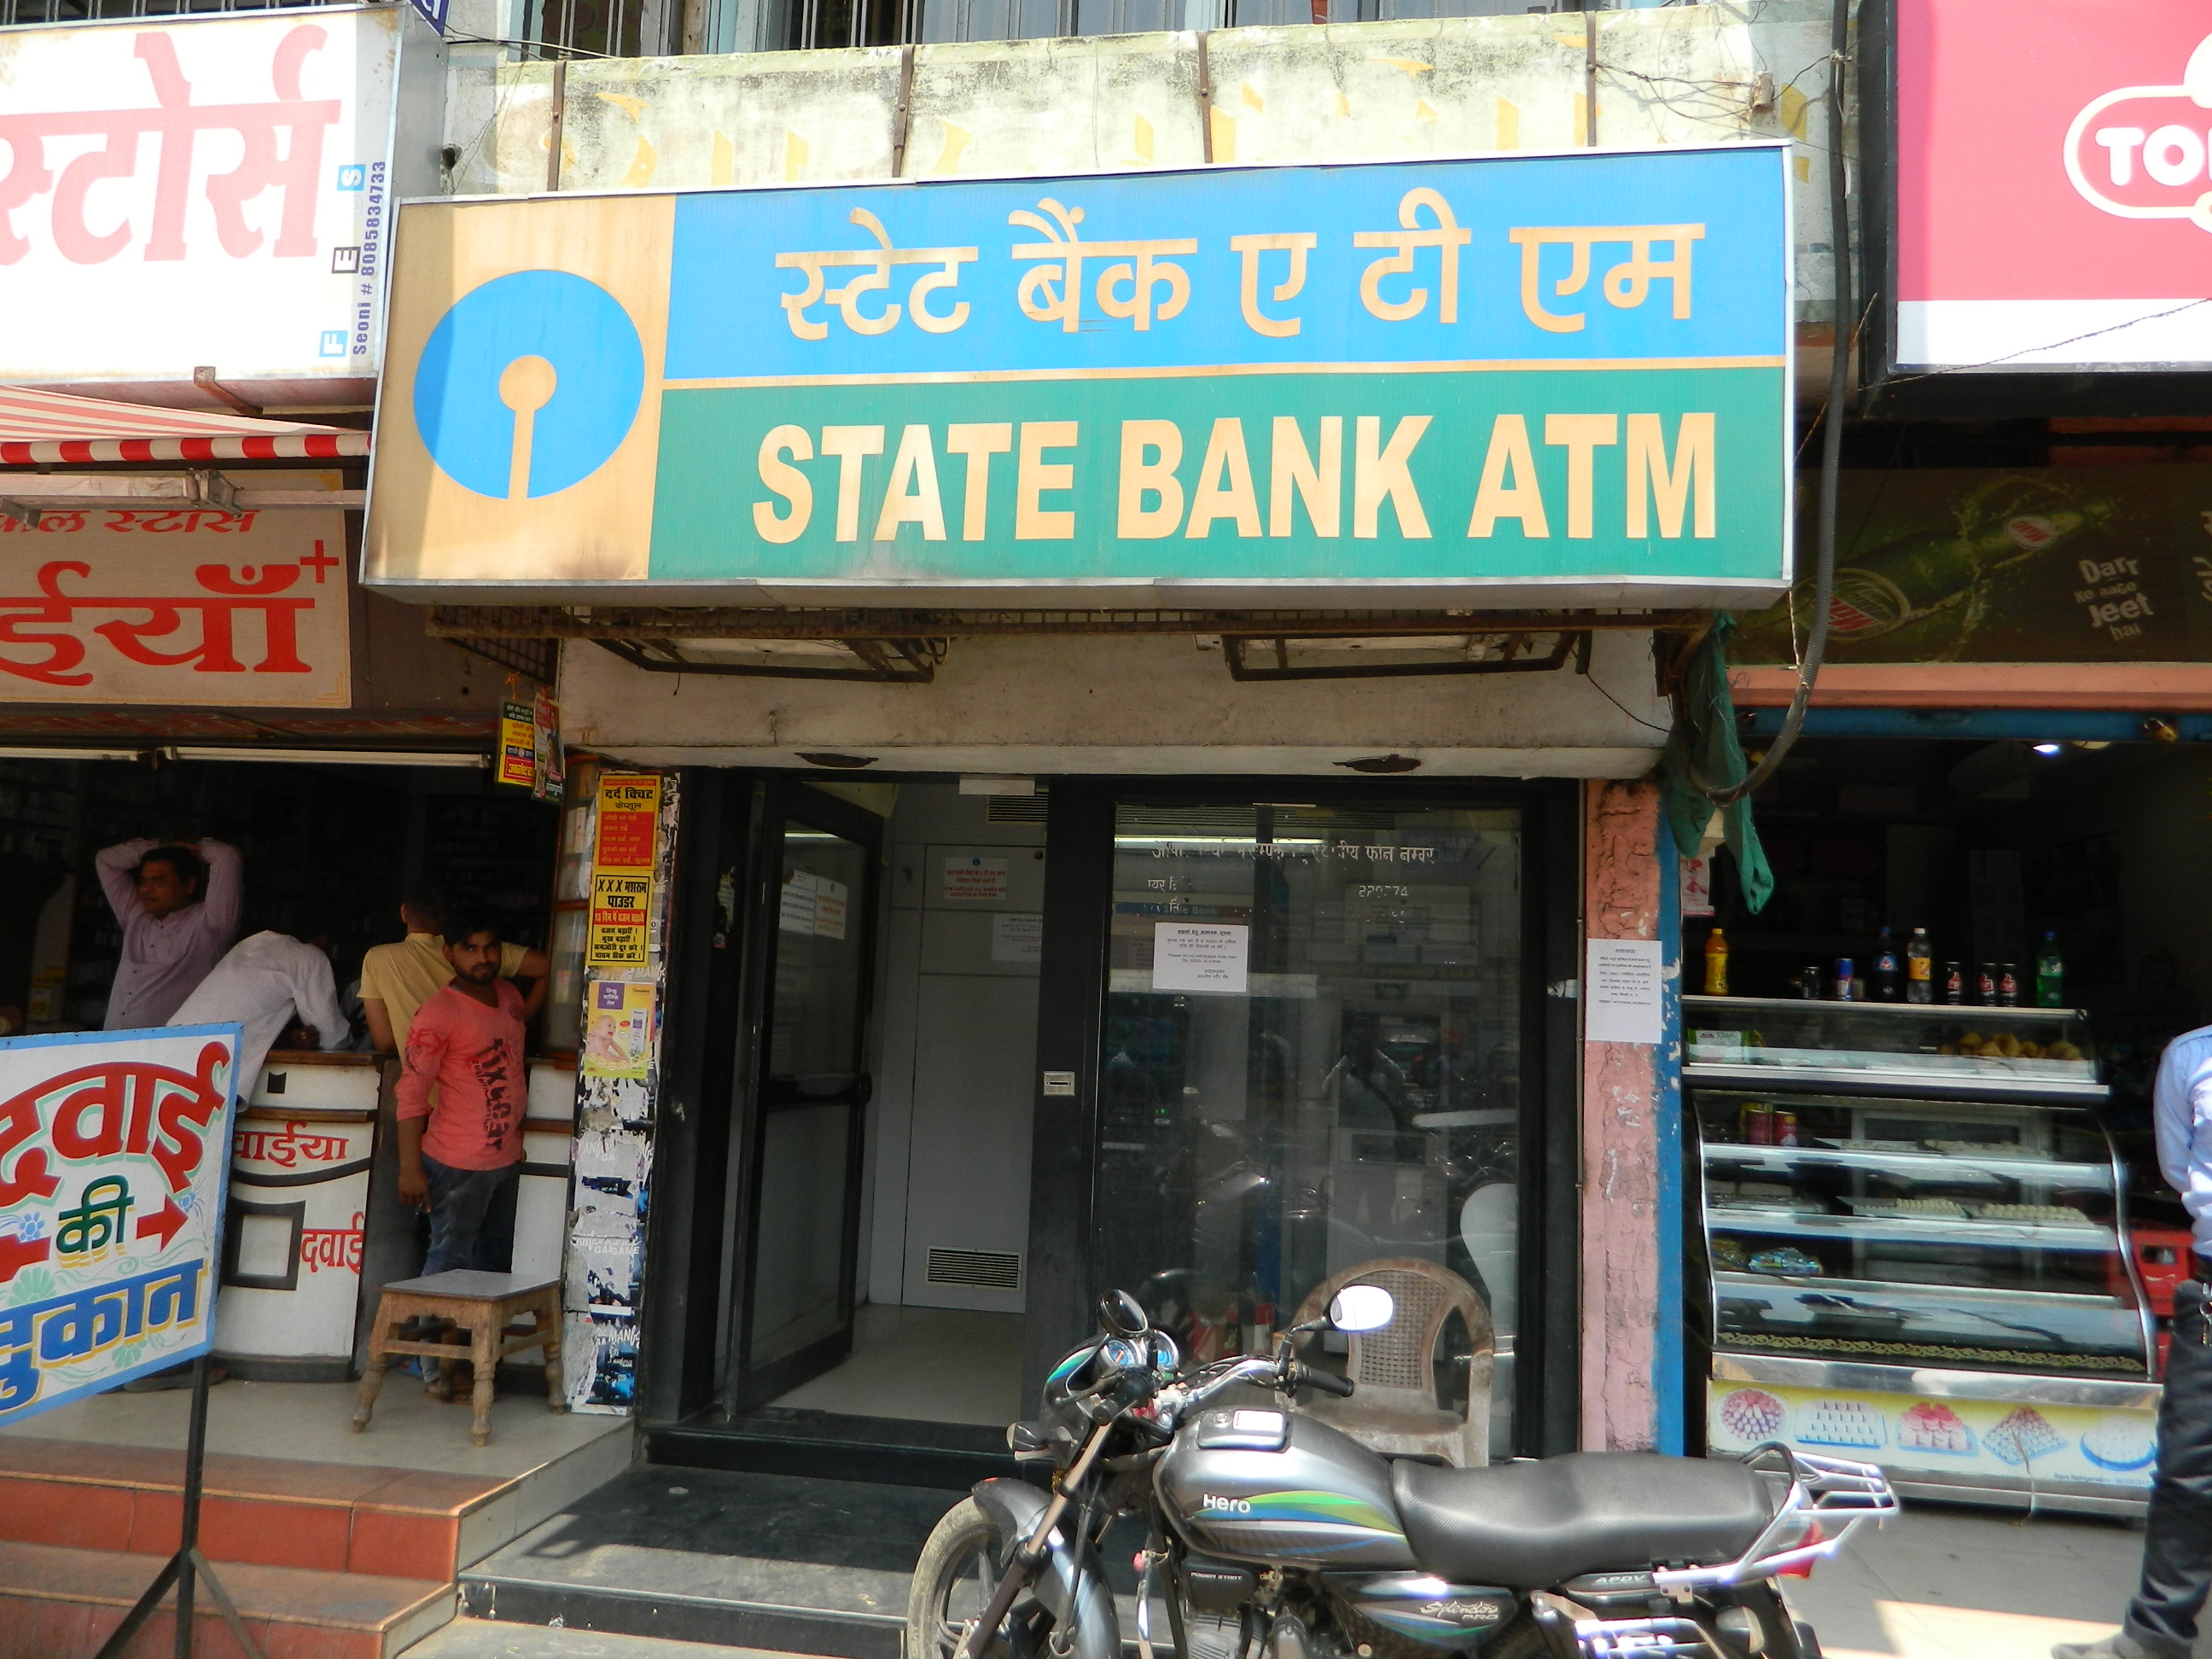 ATM, Rupee, Unsecured, Consumer, Distressed, Problem, Bank